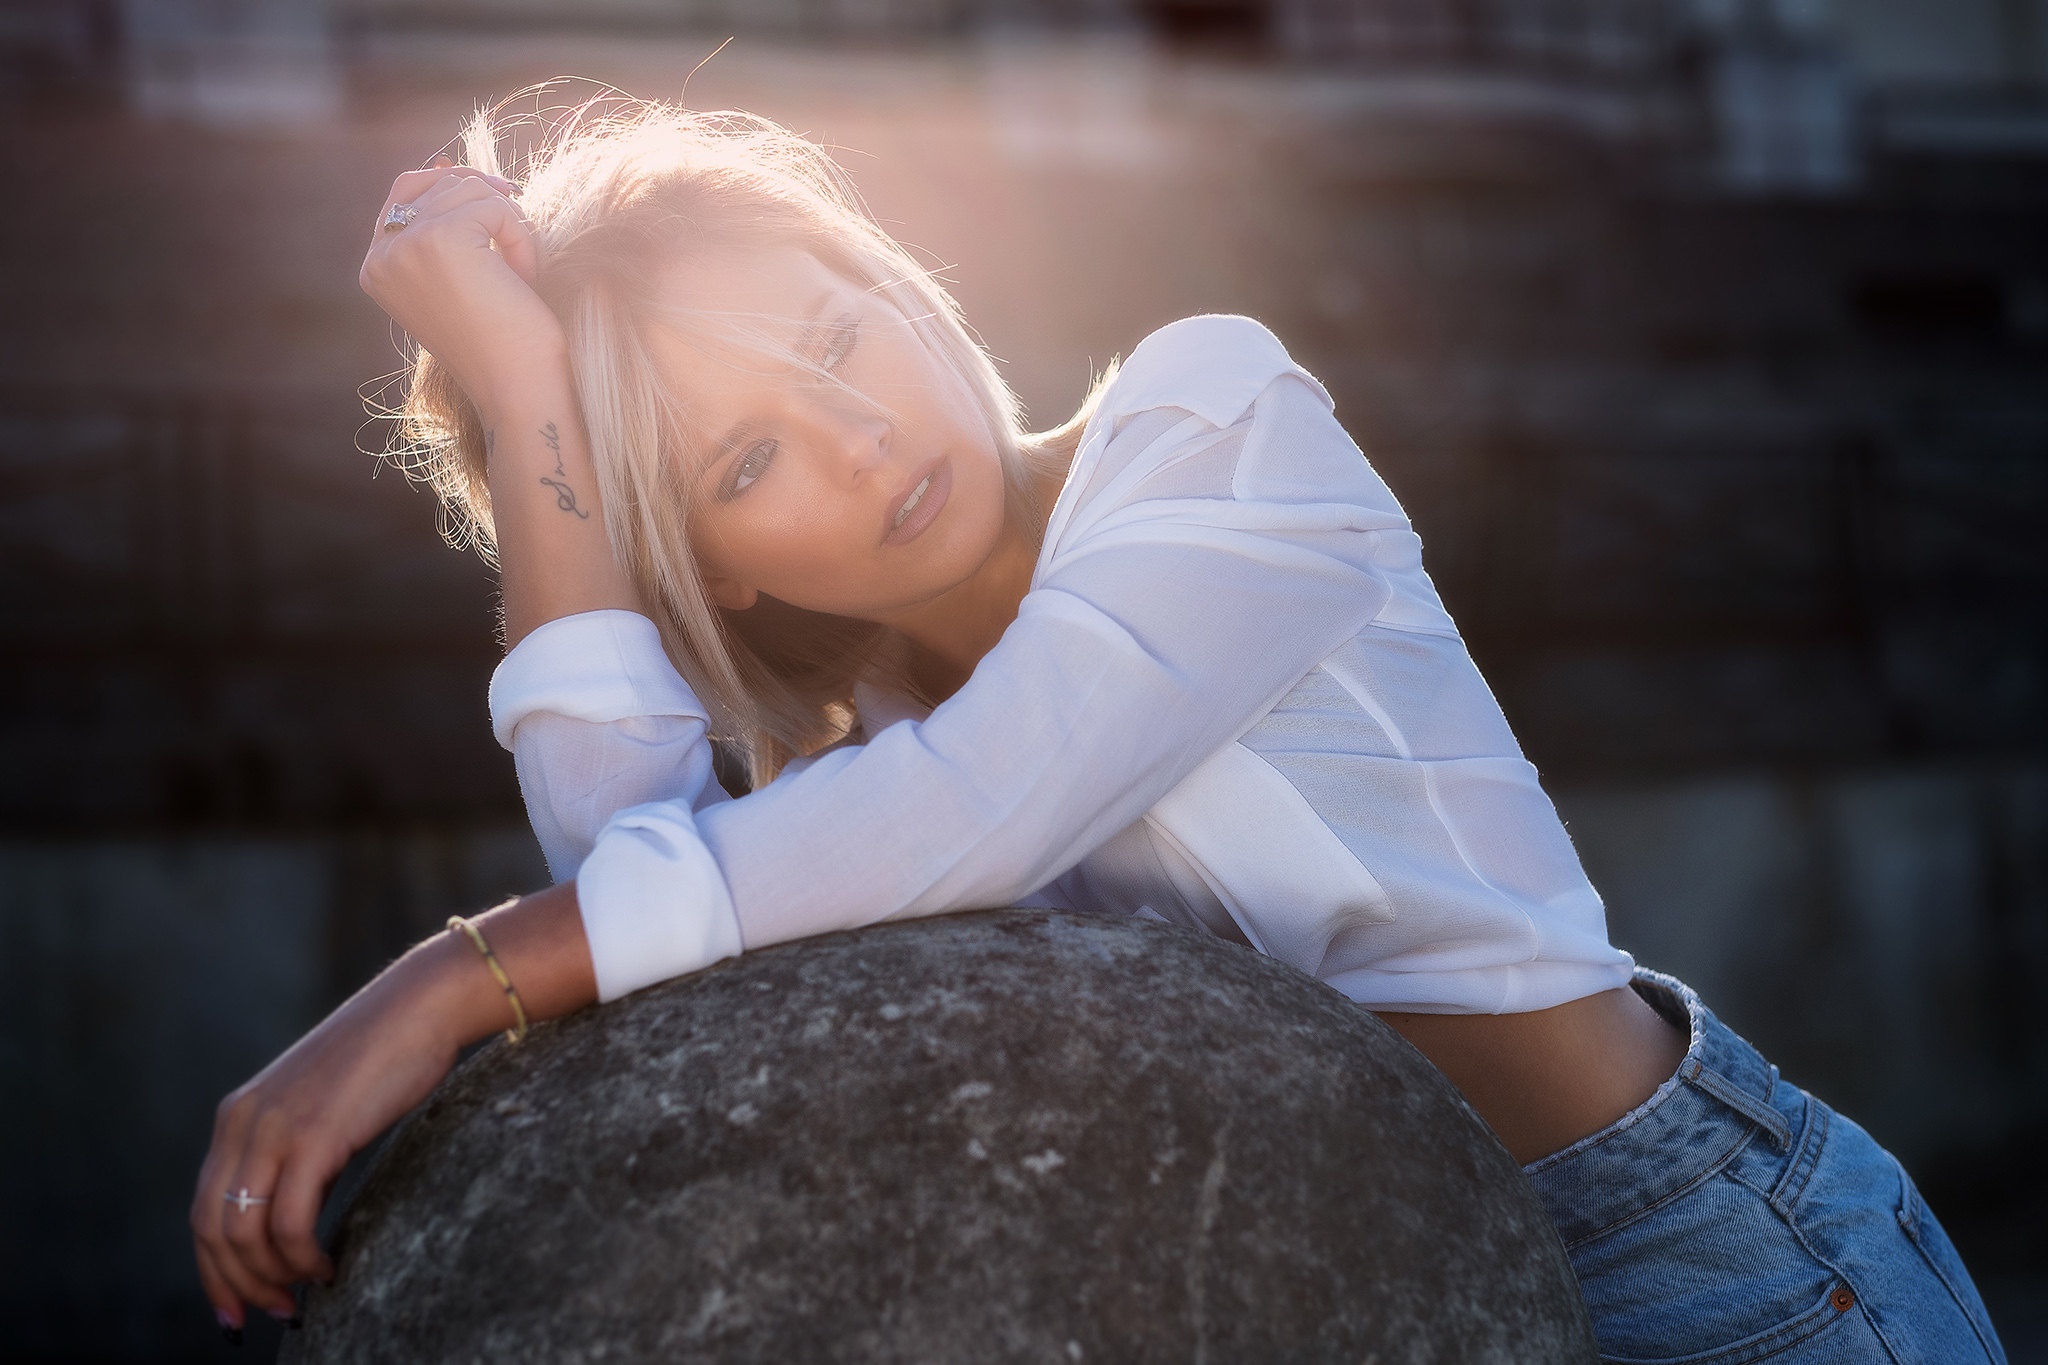 People 2048x1365 Alex Siracusano model women blonde blue eyes parted lips shirt white shirt jeans hips tattoo rocks stones sunlight hand(s) in hair looking away natural light portrait